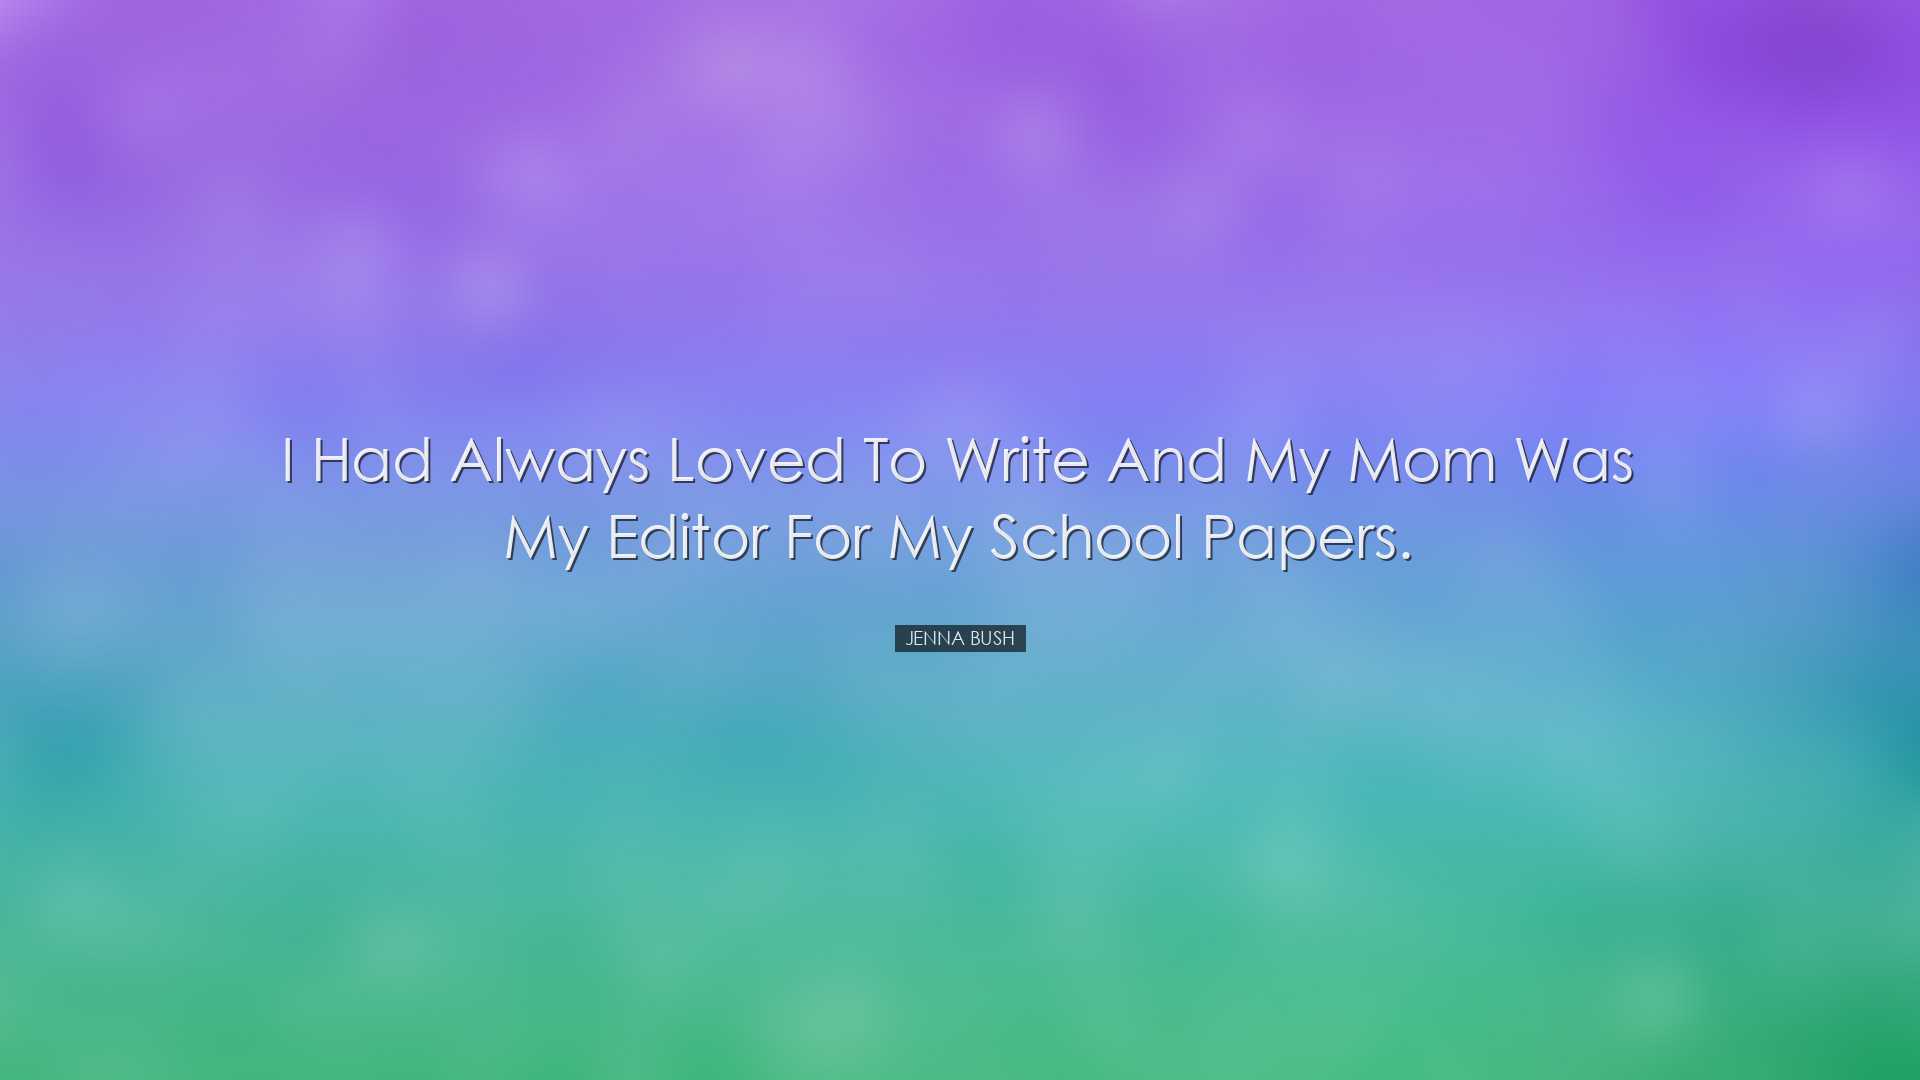 I had always loved to write and my mom was my editor for my school